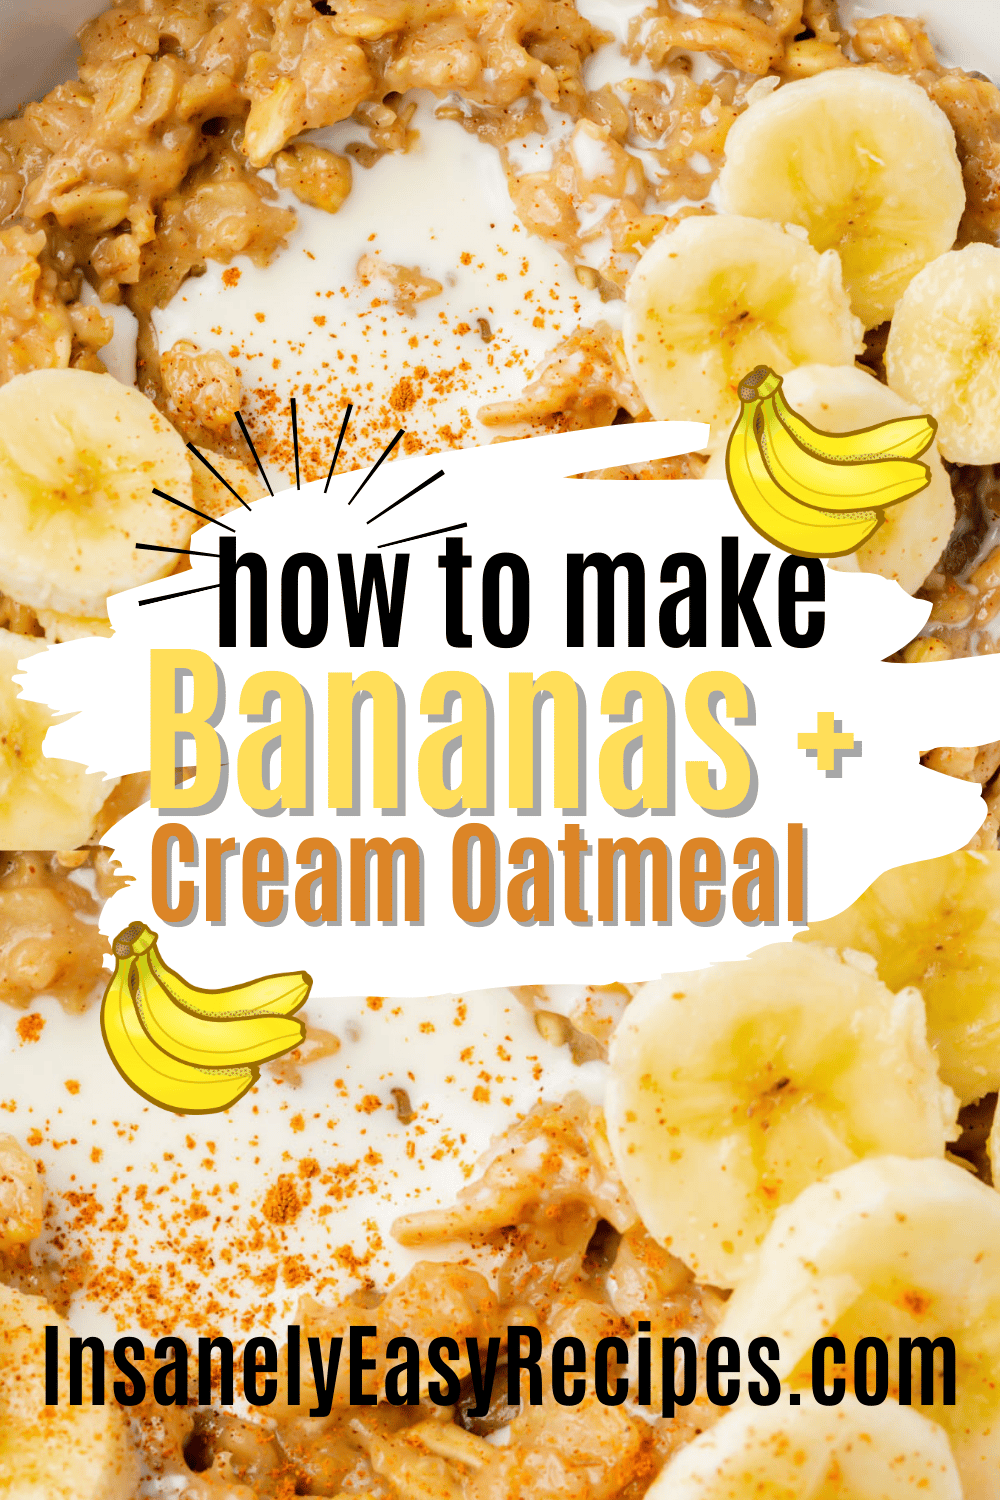 Pinterest photo that says "How to make Bananas and Cream Oatmeal".